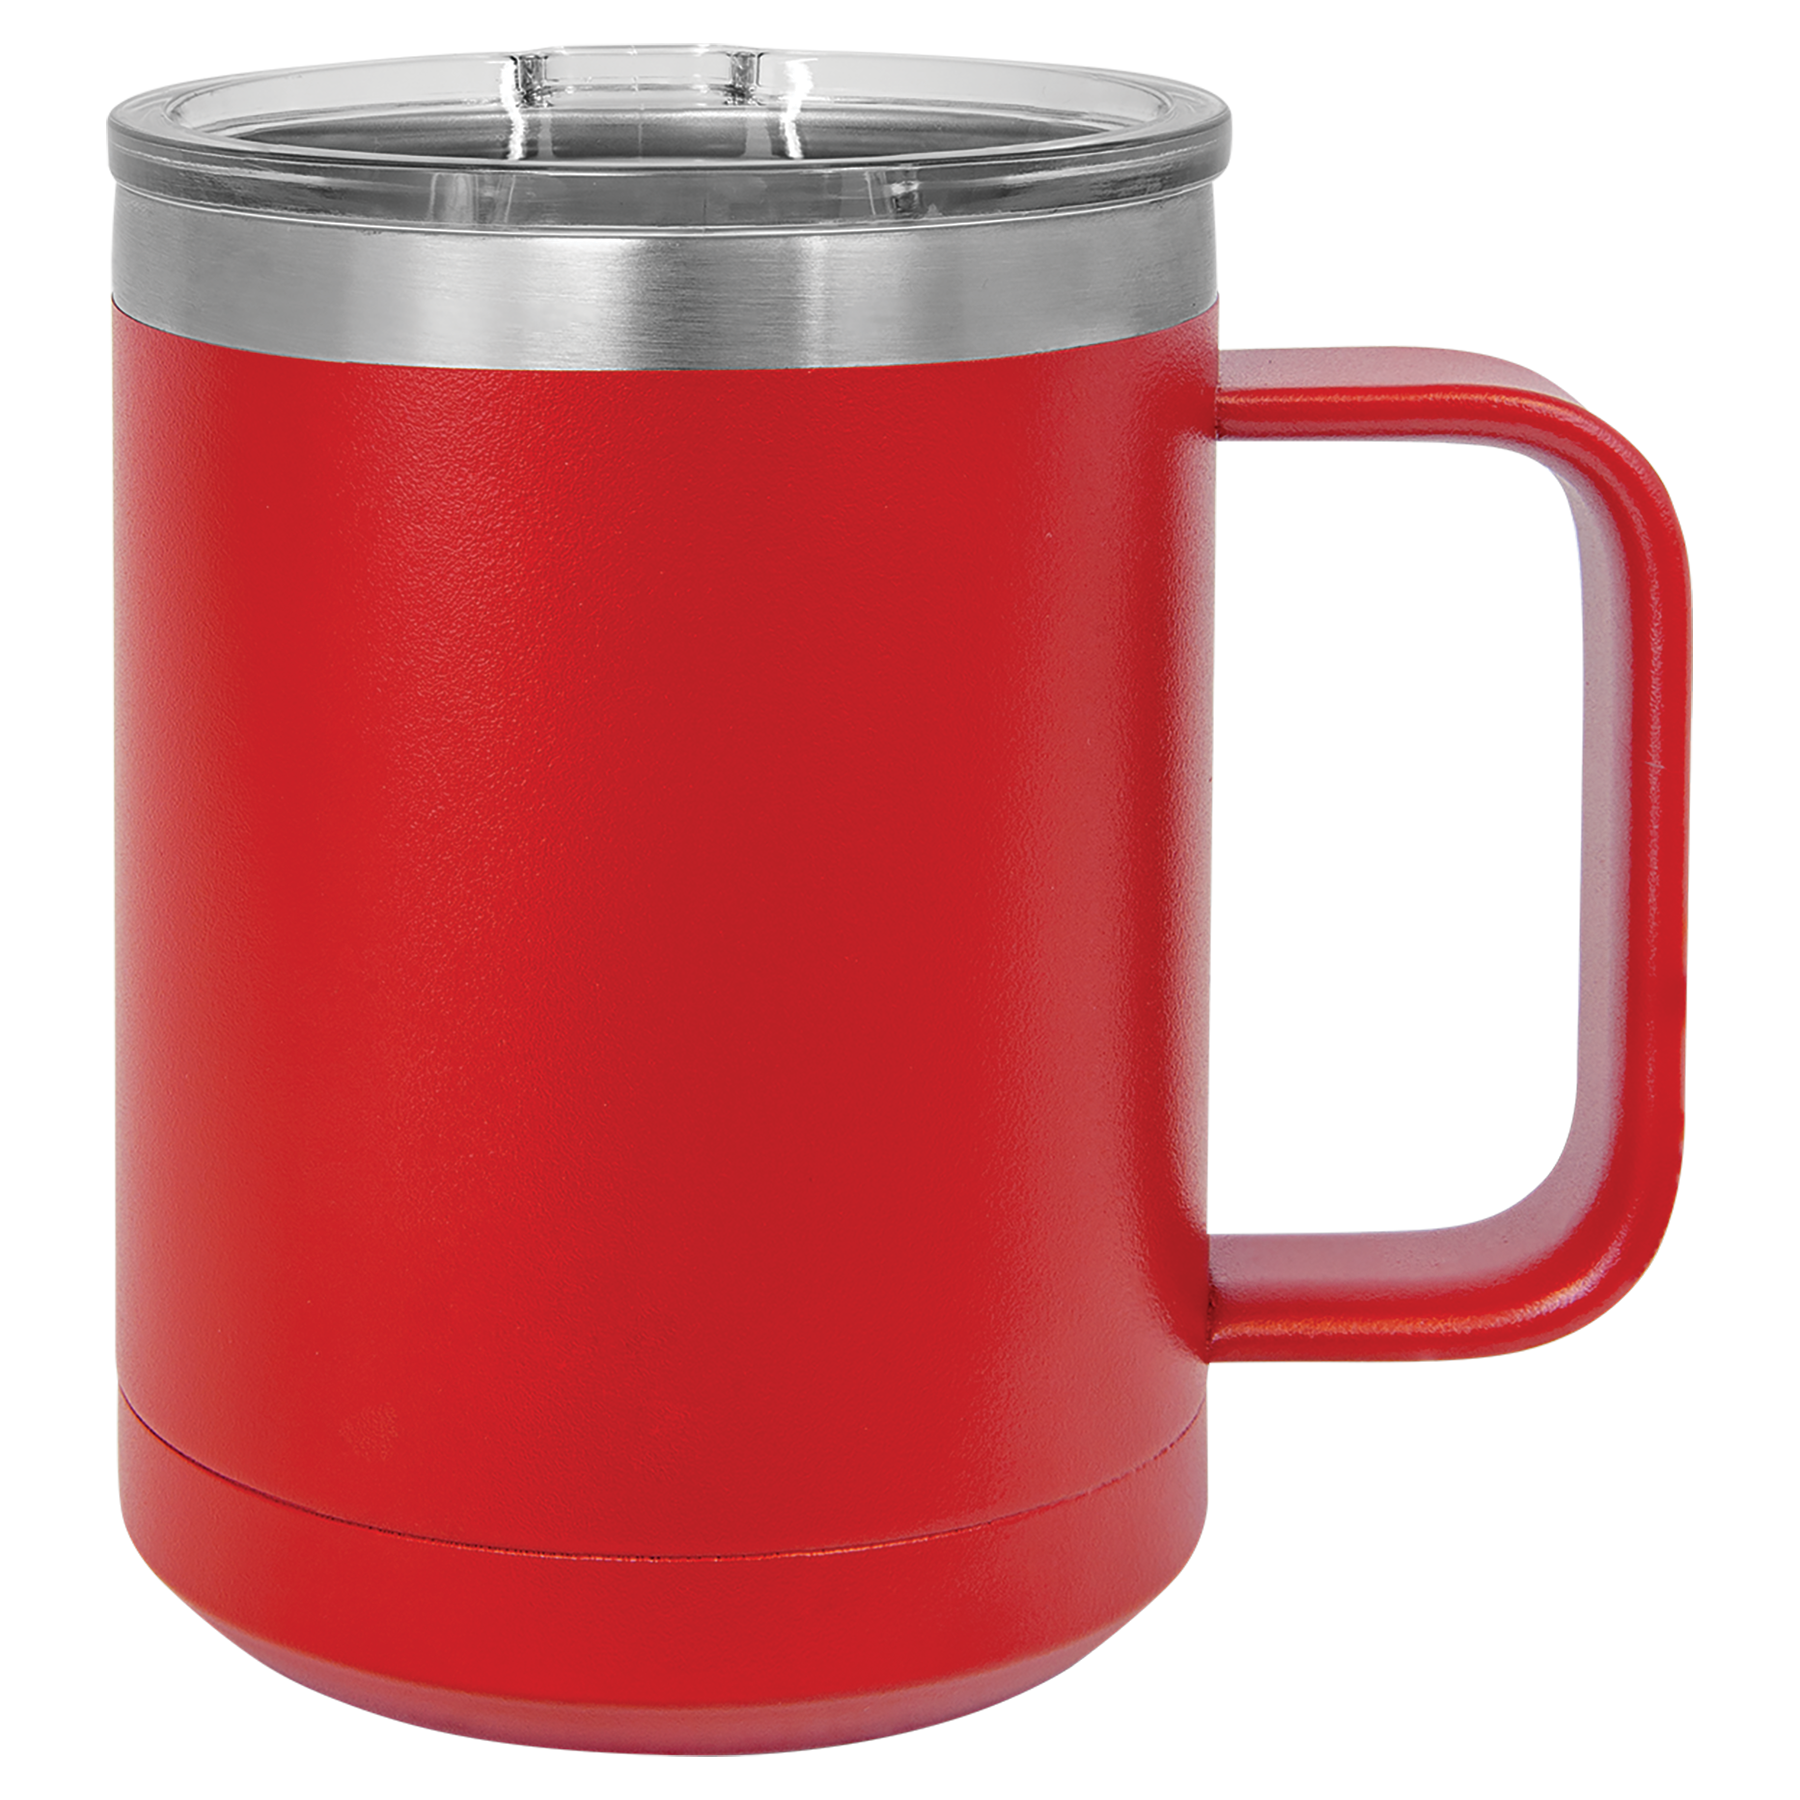 Red 15oz Coffee Mug -One Free Engraving  -Fits most Cup Holders  -Double-wall Vacuum Insulated  -Made from 18/8 Gauge Stainless Steel (Type 304 Food Grade)  -Lid is BPA Free (Hand Wash Only)  -Not recommended for Dishwasher  -Works with Cold and Hot Drinks  -18 Color Options  -Perfect for Personalized Gifts, Awards, Incentives, Swag & Fundraisers